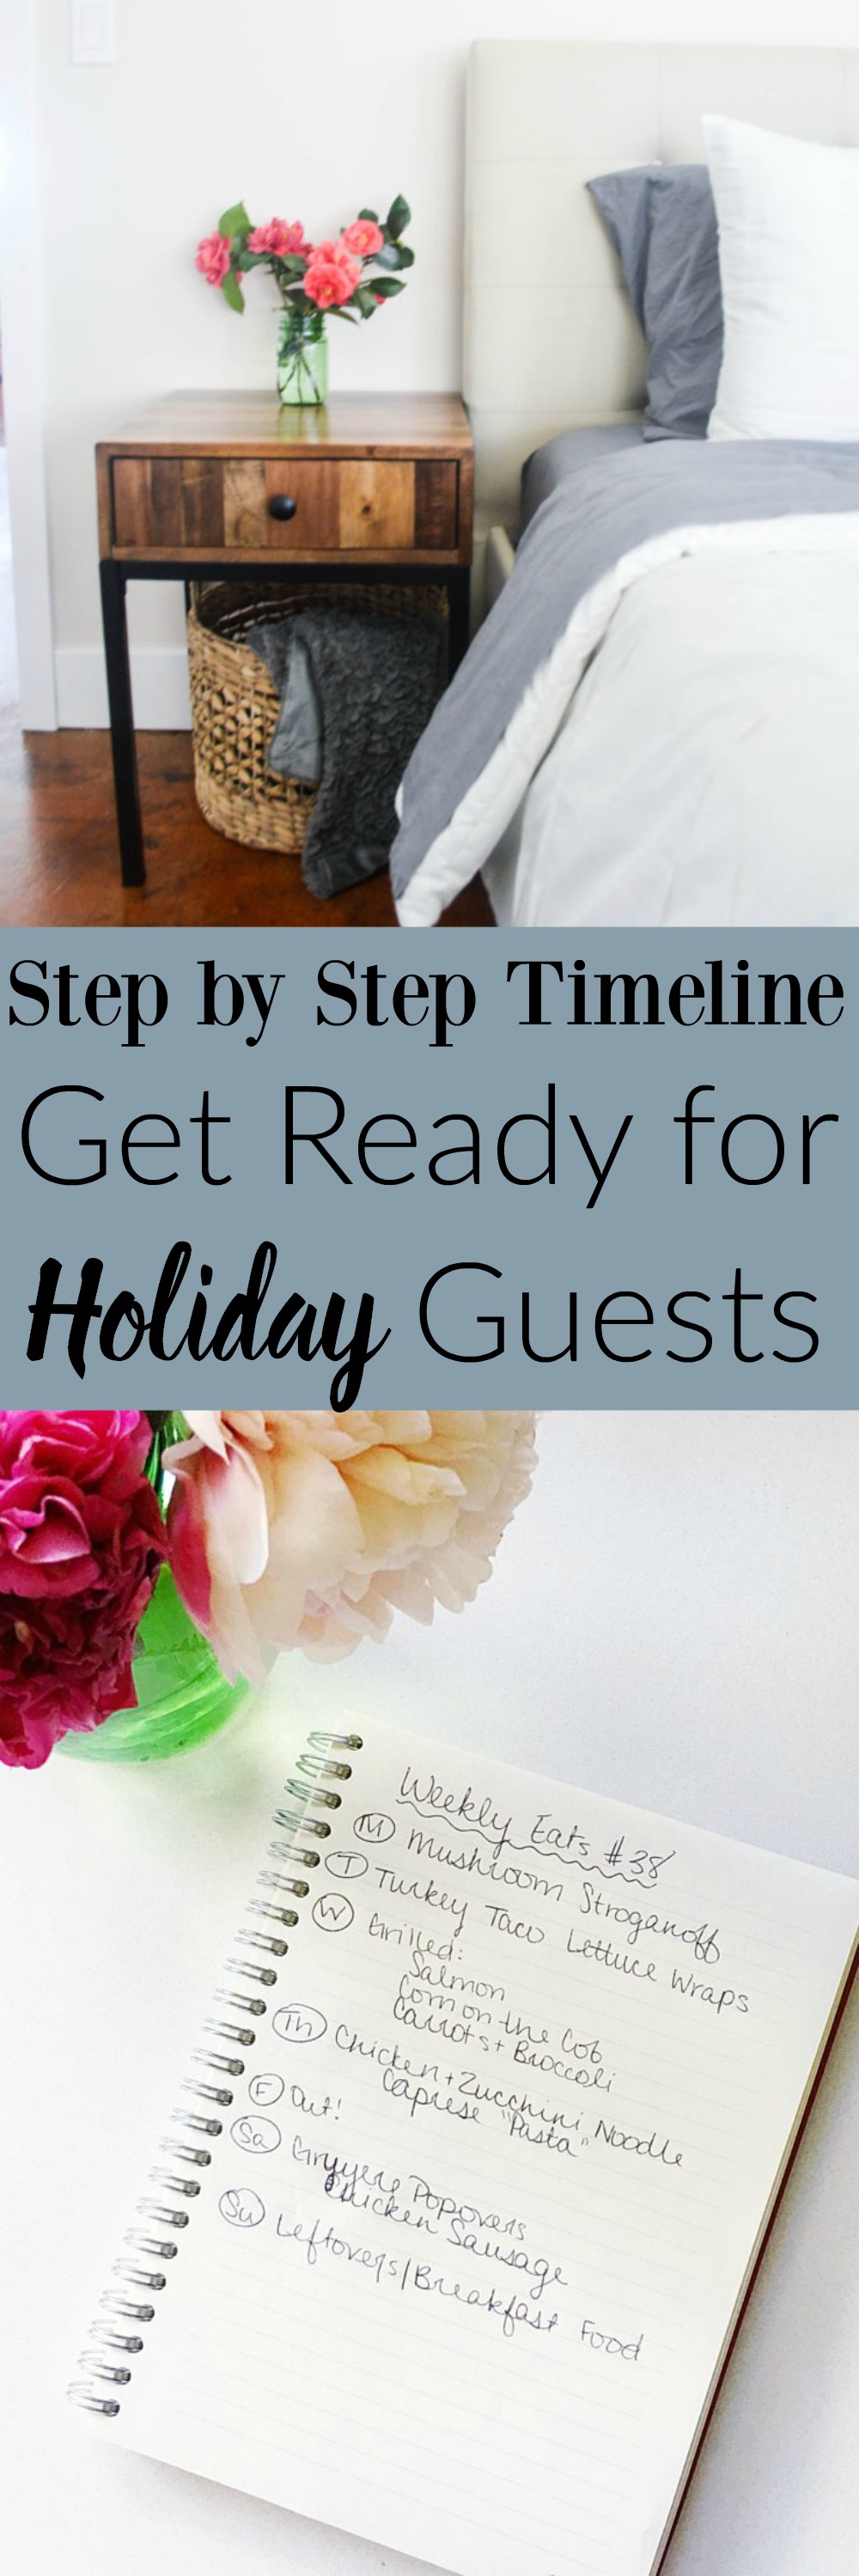 Step by Step Timeline to Get Ready for Holiday Guests